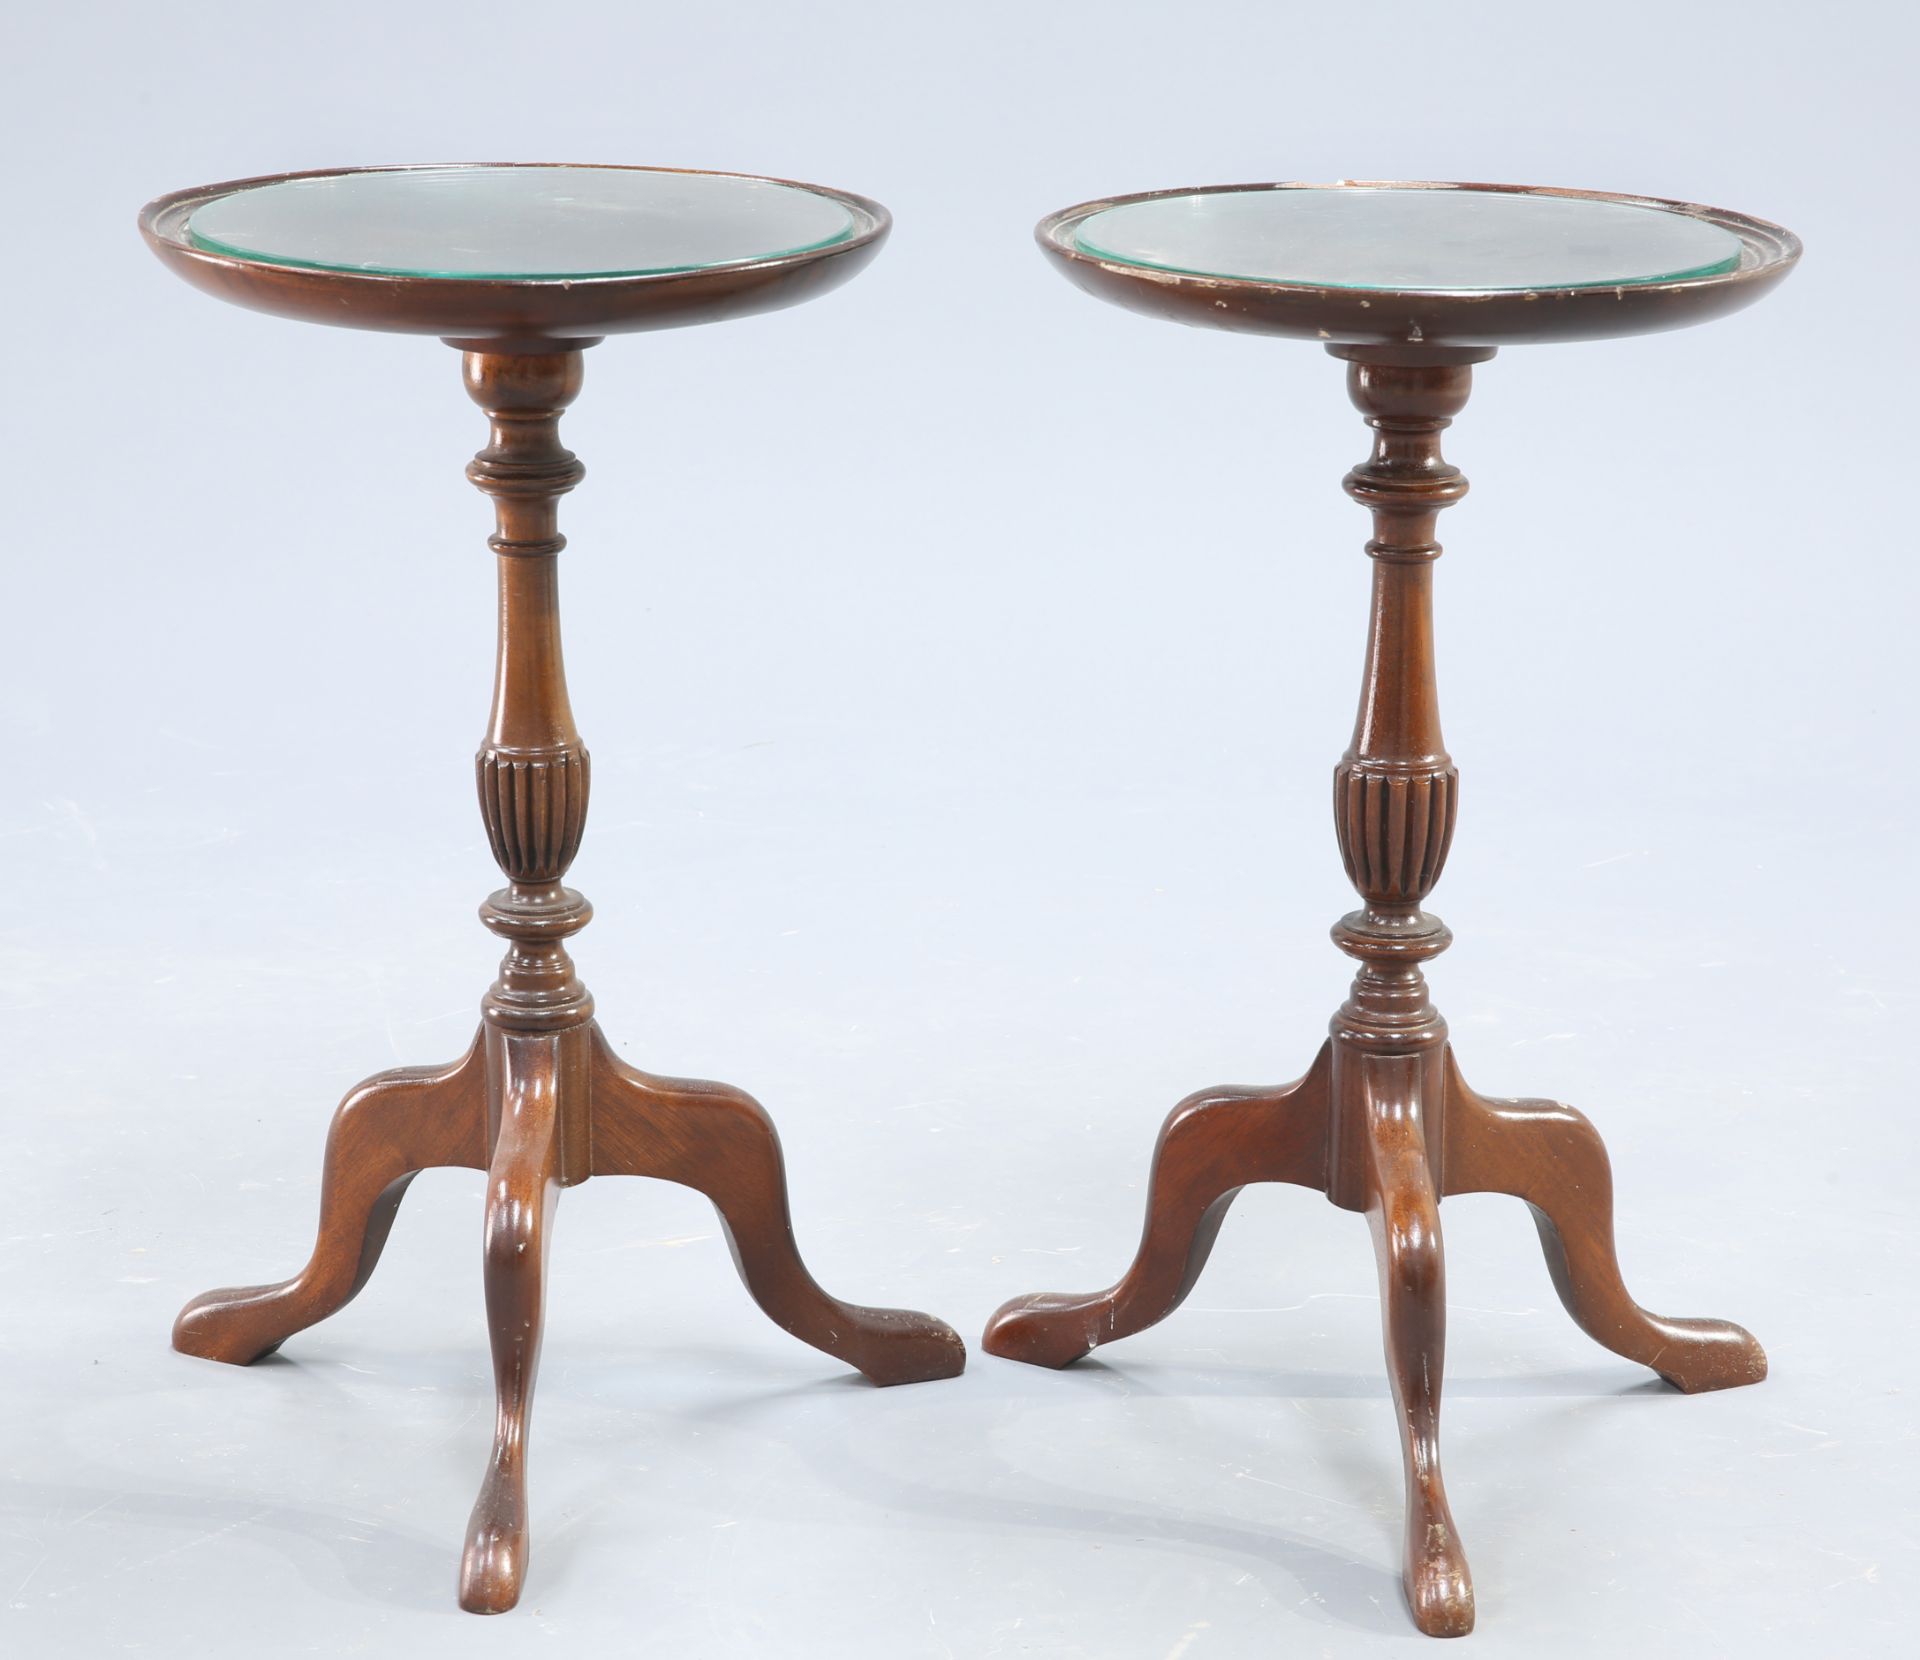 A 19TH CENTURY MAHOGANY CHILD'S CHAIR AND STAND - Image 3 of 3